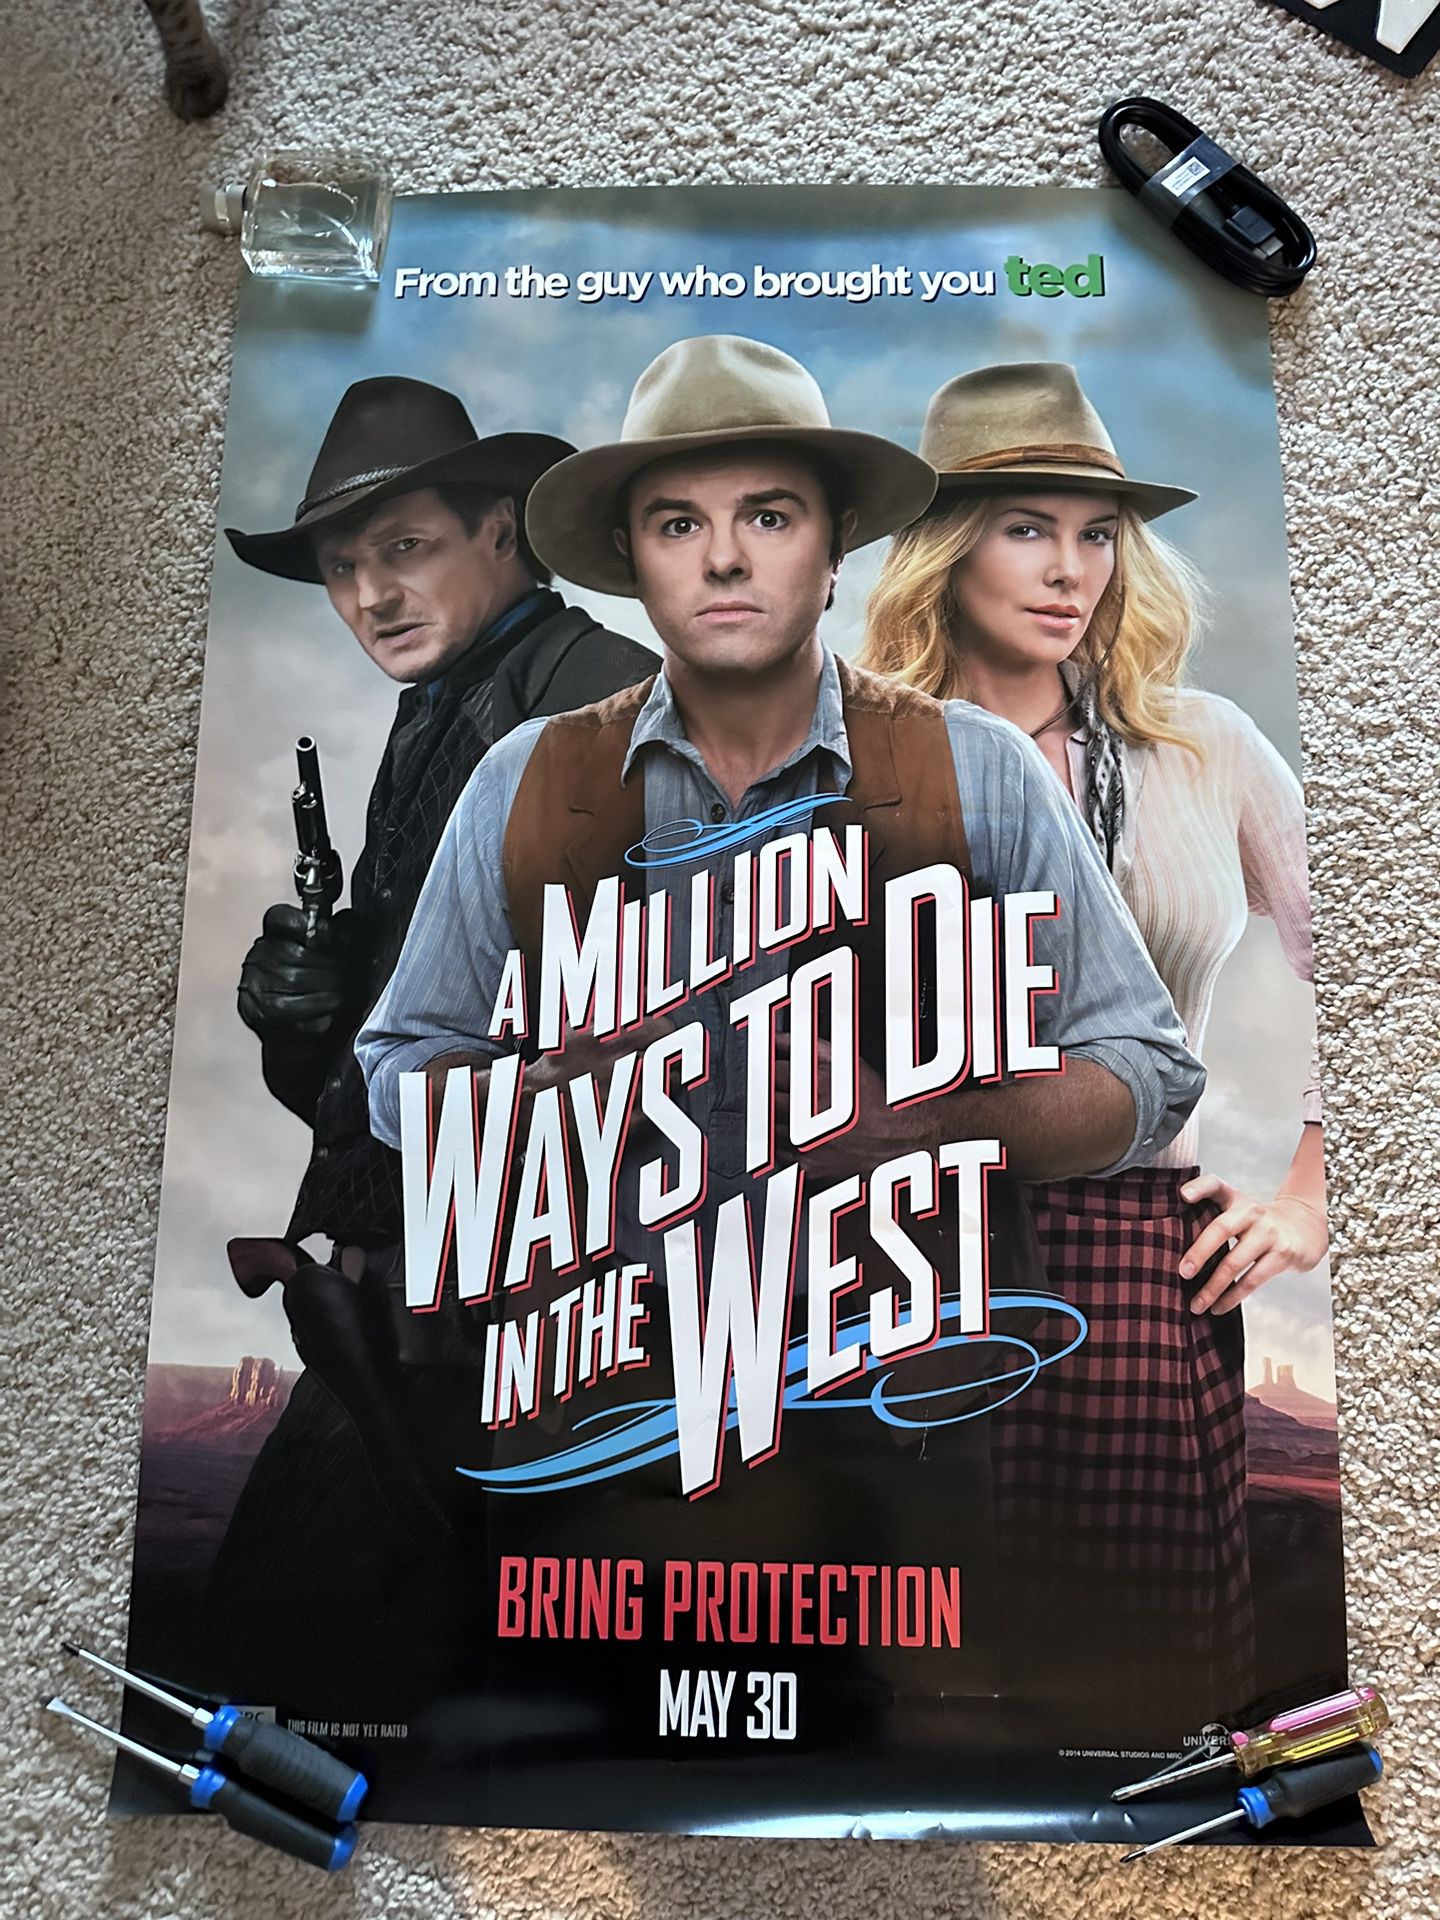 A MILLION WAYS TO DIE IN THE WEST MOVIE POSTER 2 Sided  